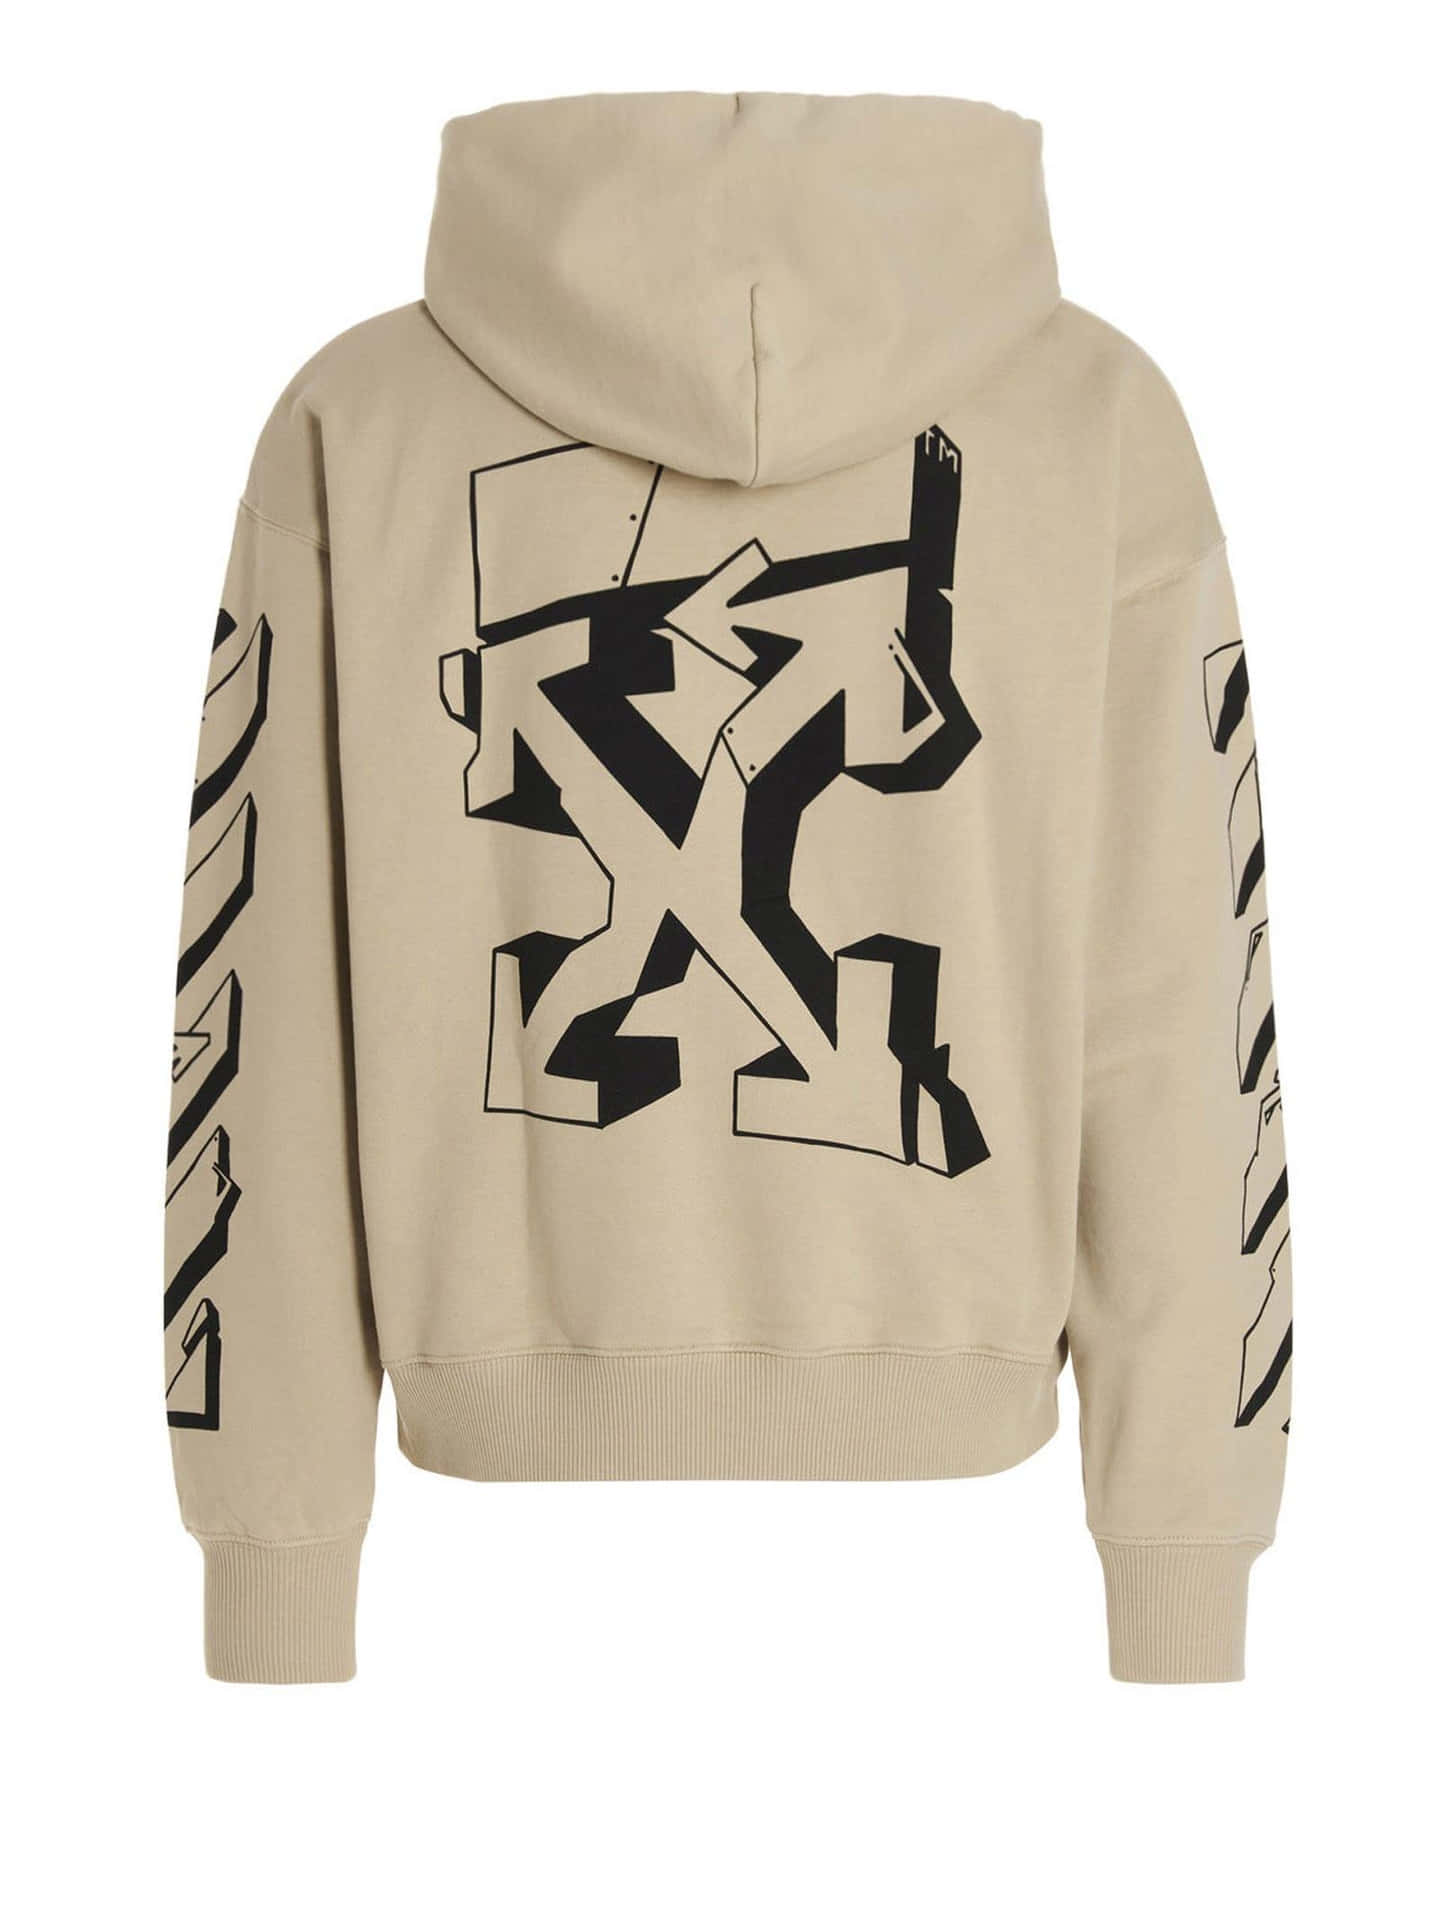 Off-White Diag Marker Arrows Hoodie